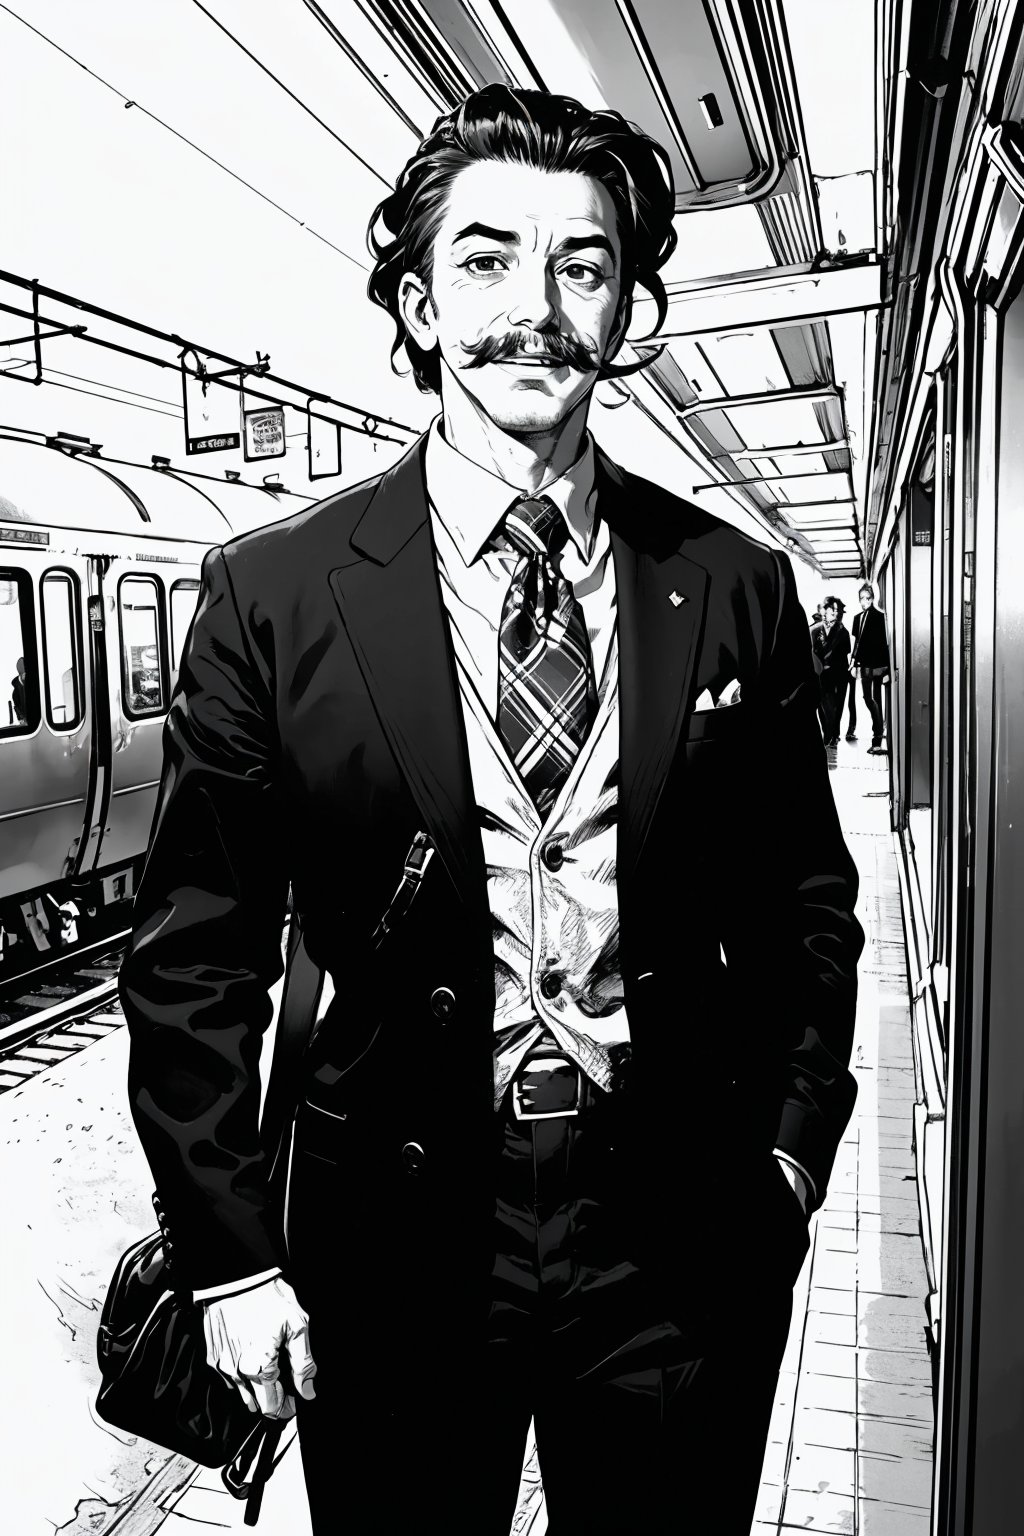 boichi manga style, monochrome, greyscale, solo, a young man, he is Walt Disney, the founder of Disneyland, slicked hairstyle, mustache, traditional plaid suit, (he is geting off from the train), smile, happy, full body shot, a country train station background, ((masterpiece)) 